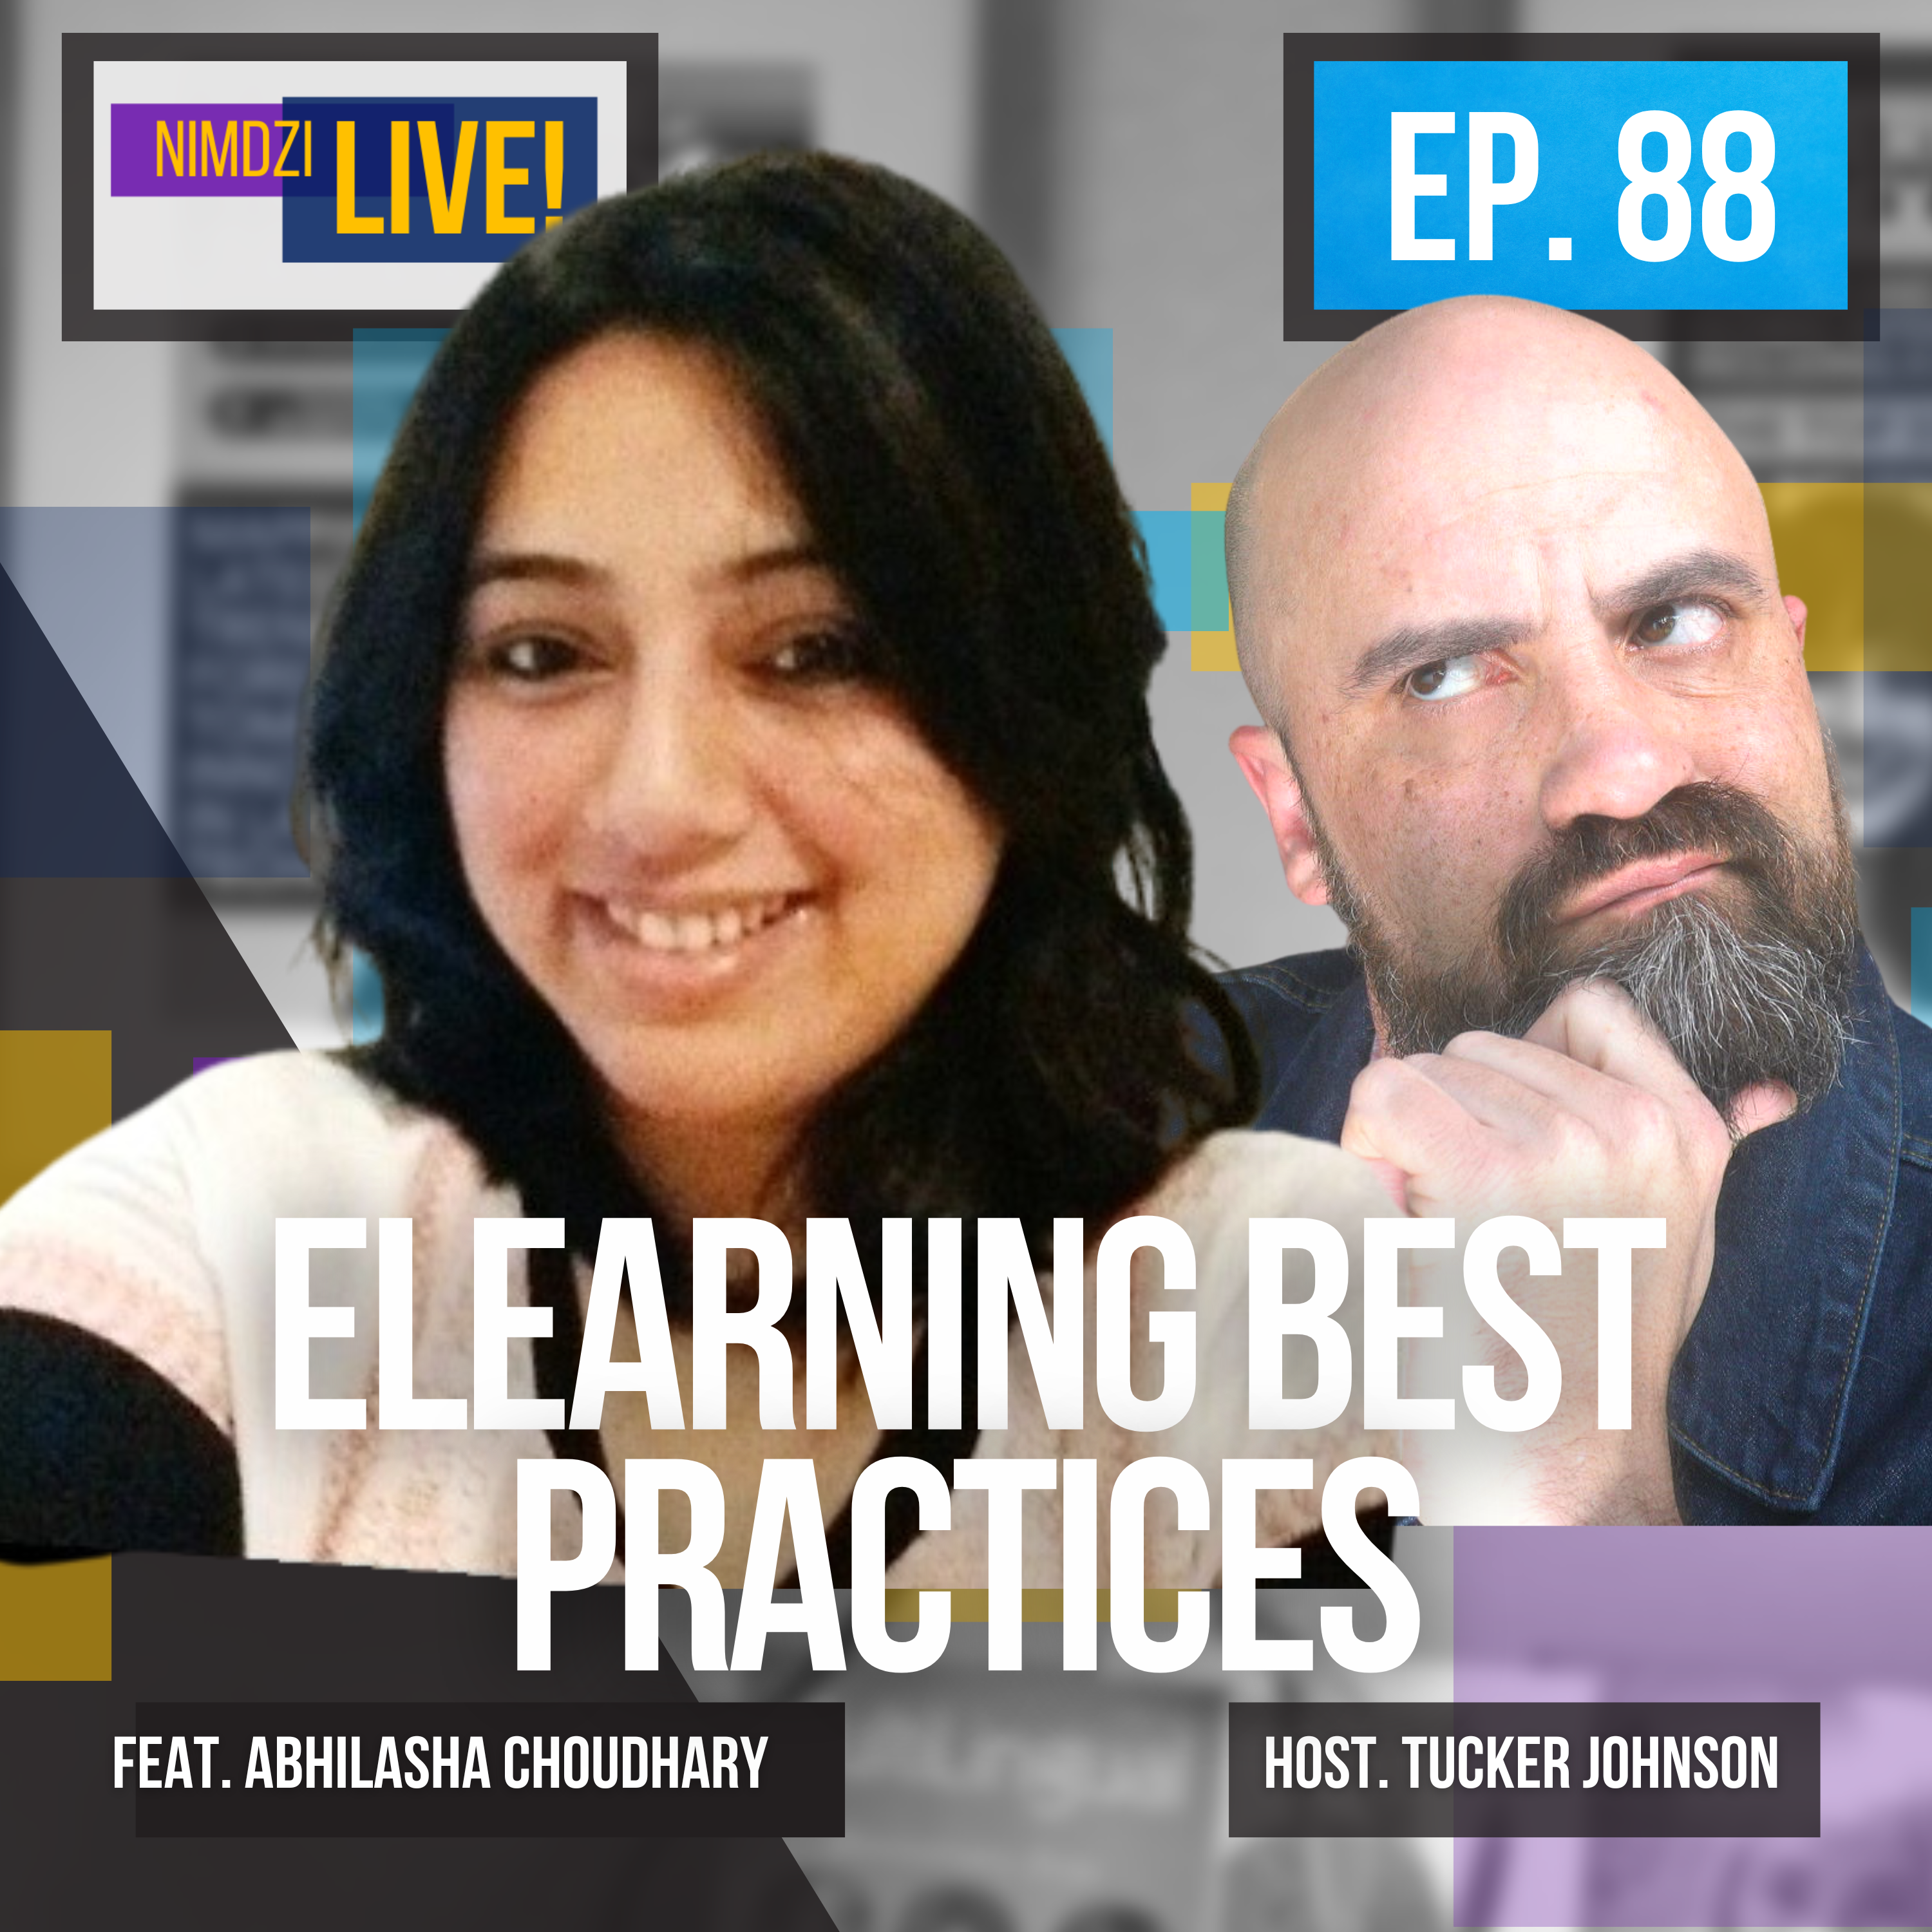 eLearning best practices feat. Abhilasha Choudhary